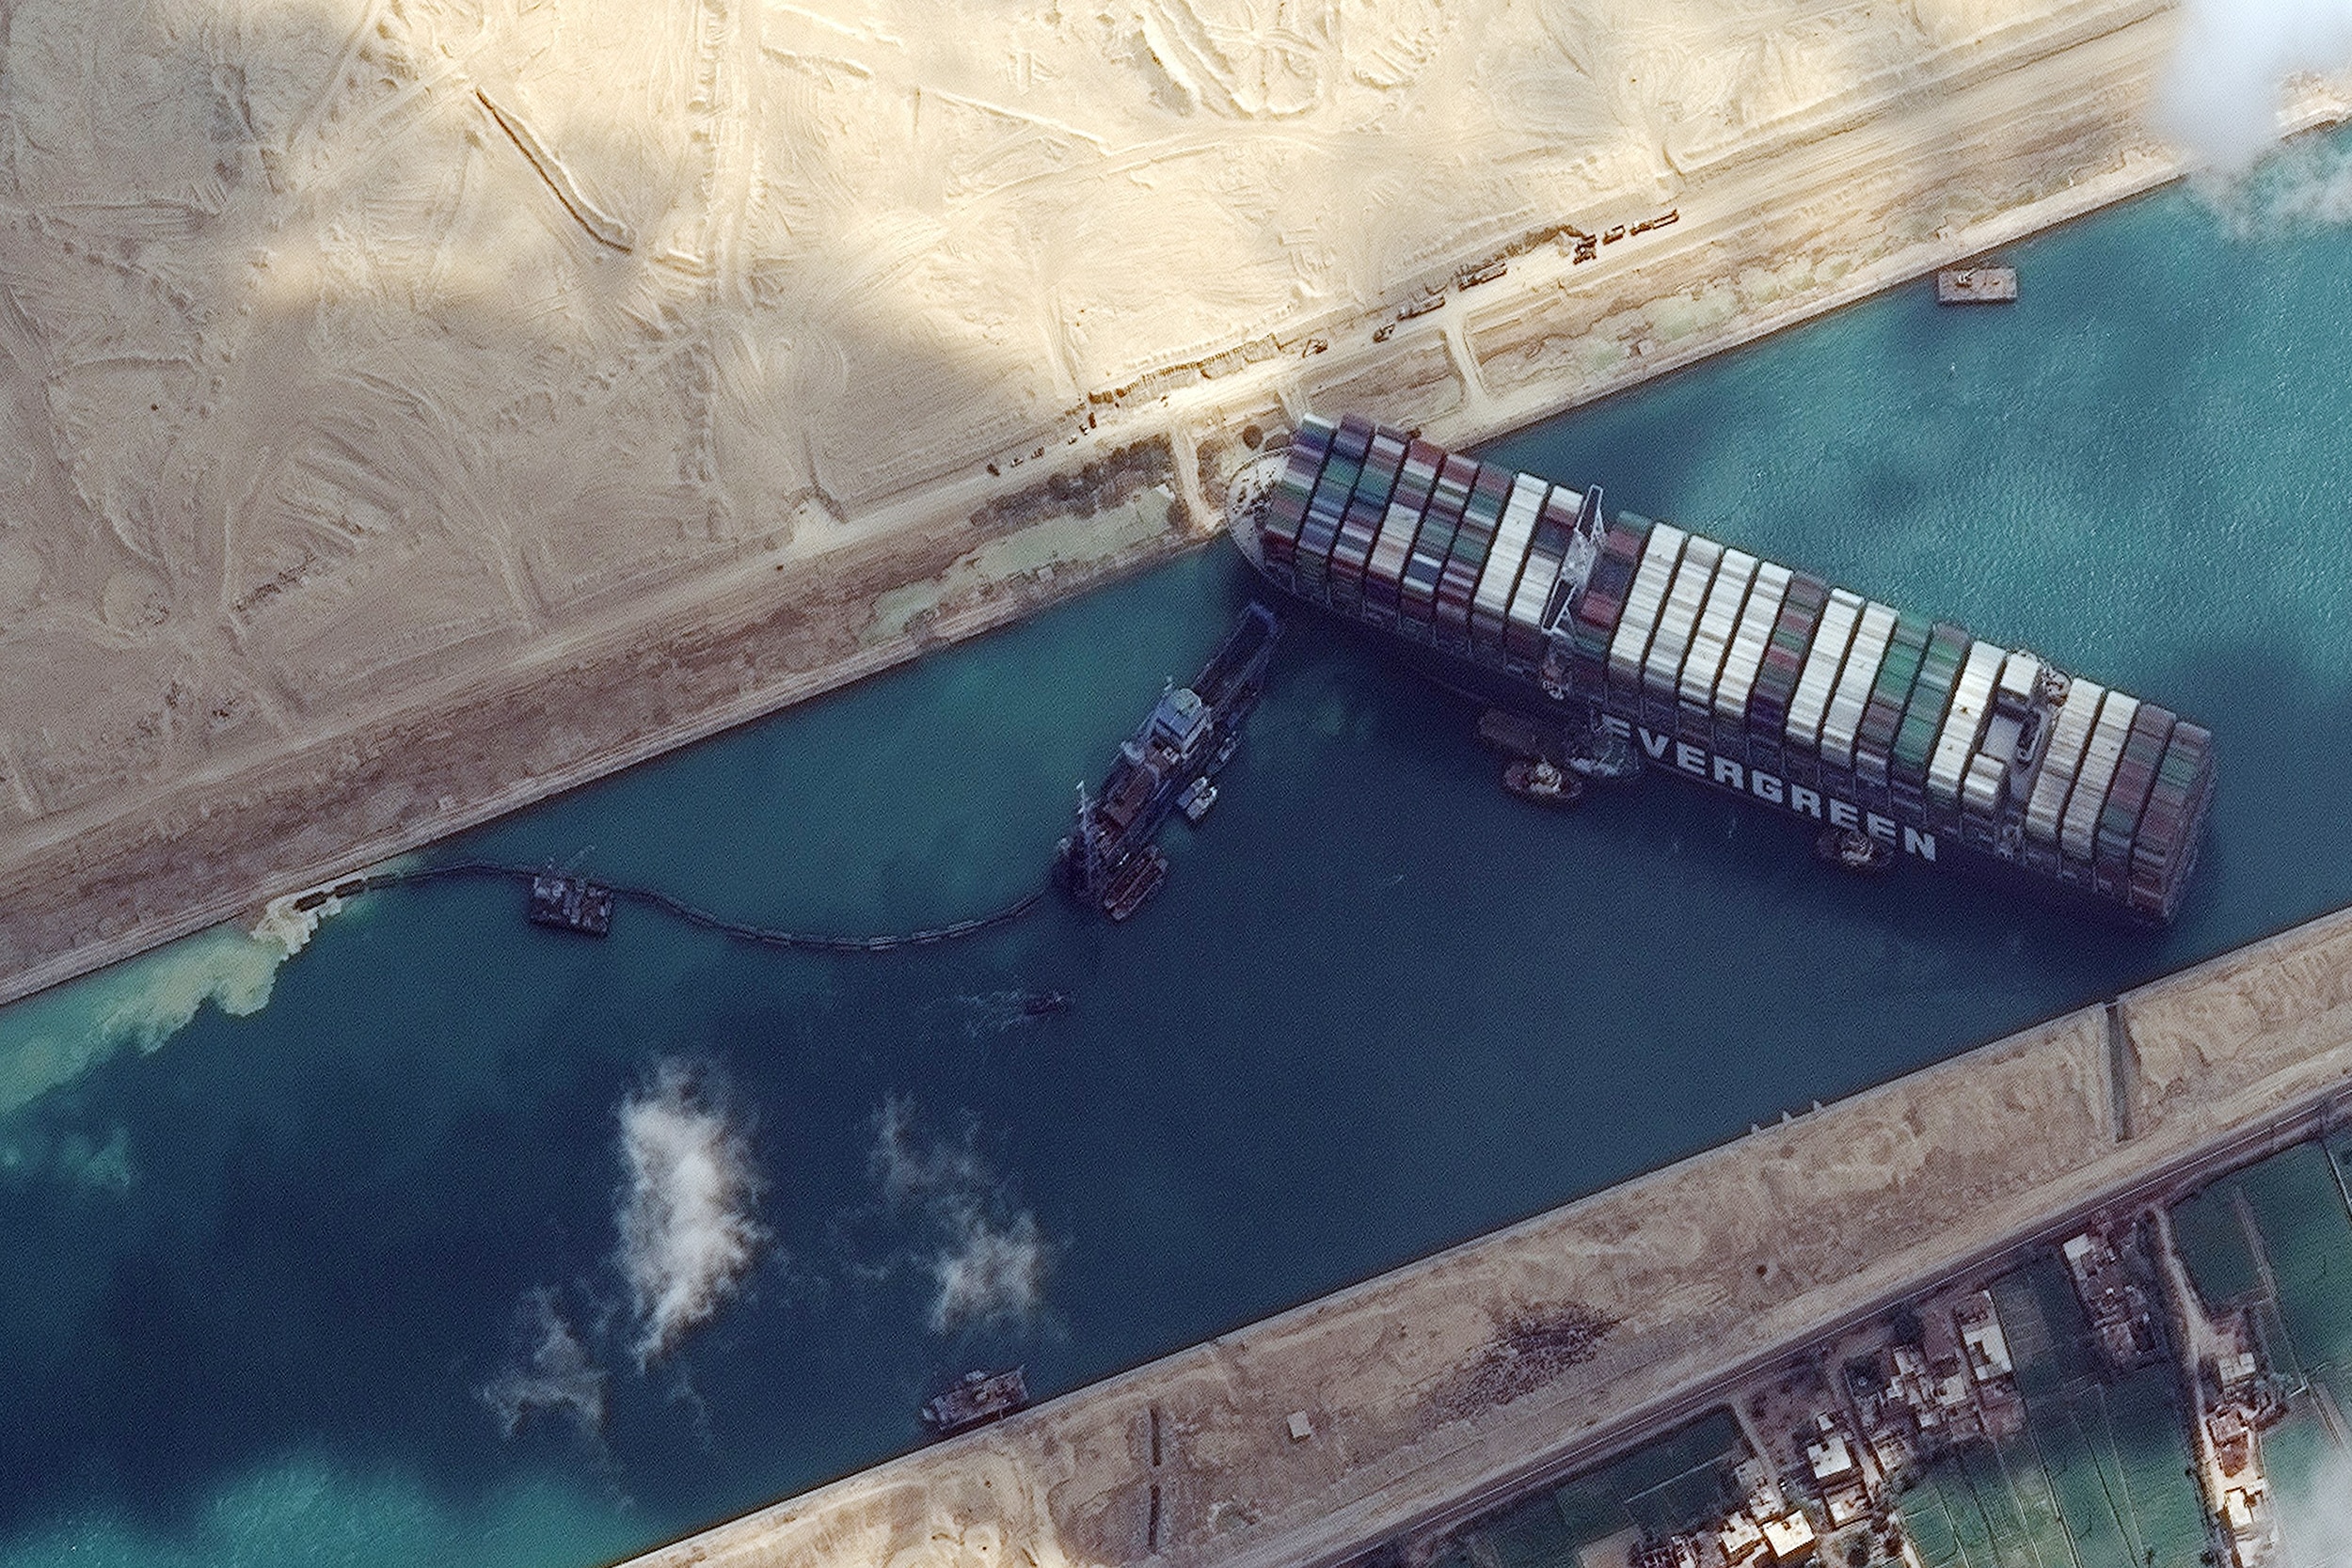 Global supply chain and trade immensely disrupted by weeklong Suez Canal blockade